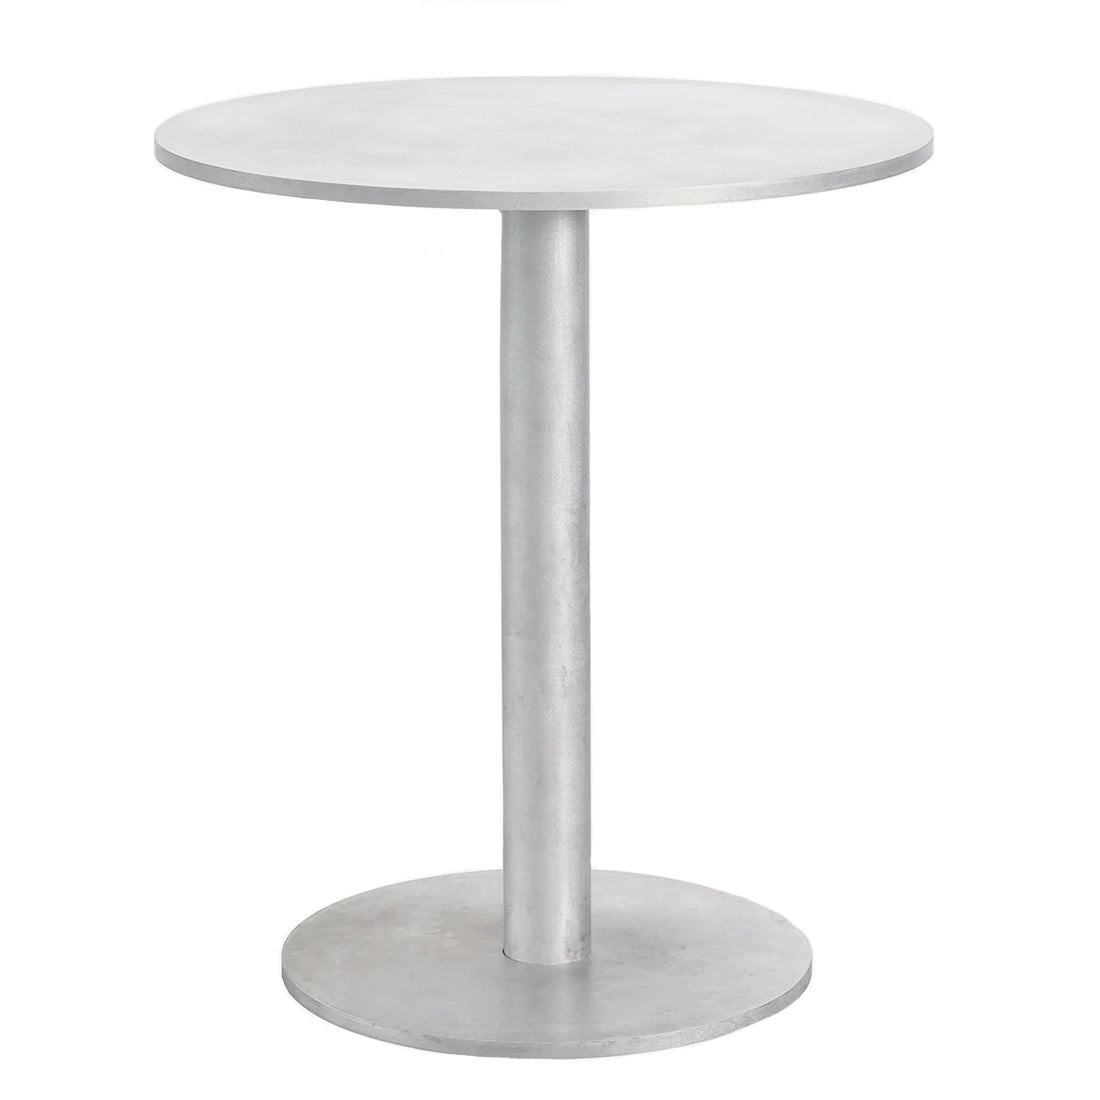 Valerie Objects round table S